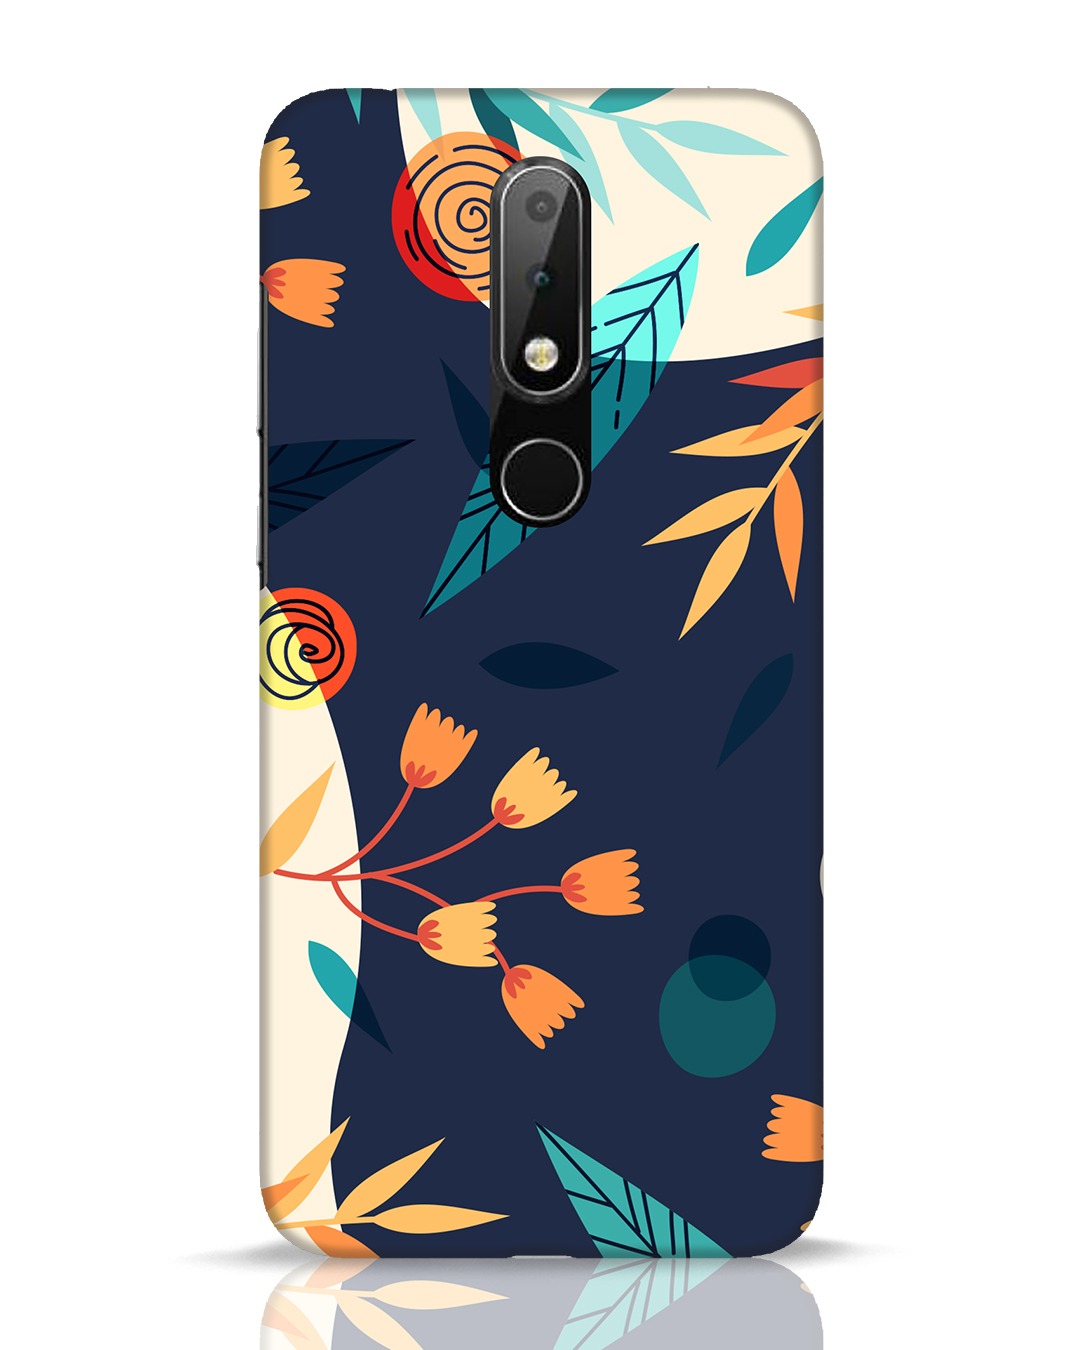 Buy Abstract Floral Nokia 6.1 Plus Mobile Cover for Unisex Online at ...